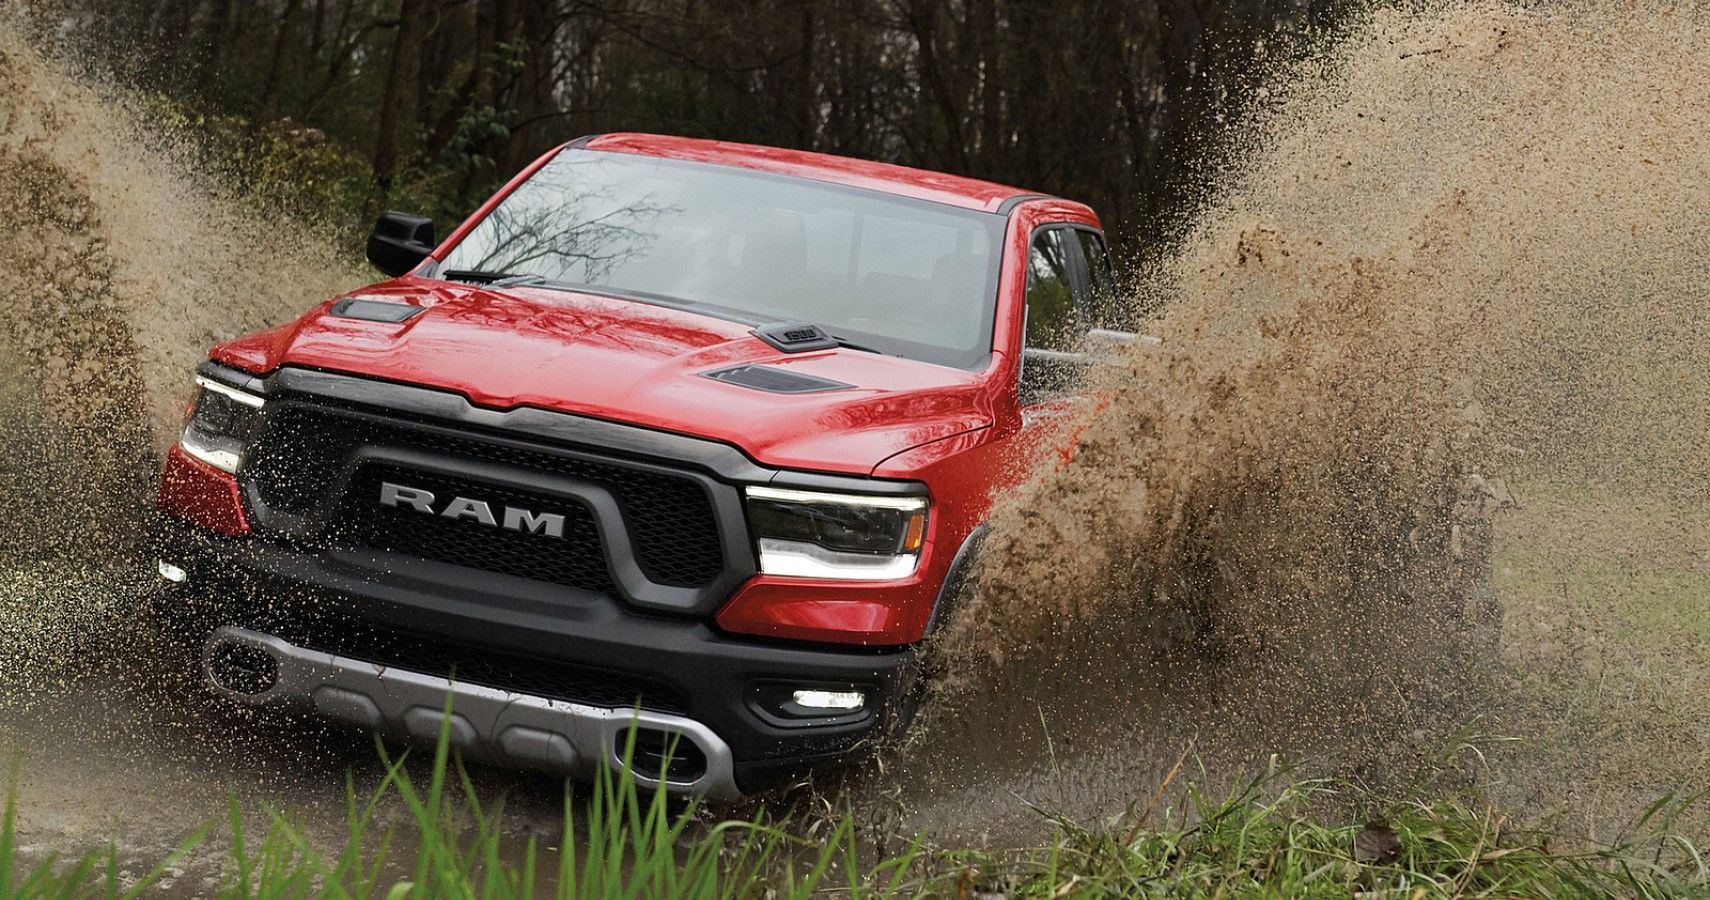 Ram 1500 Rebel in Red Front View Off-road